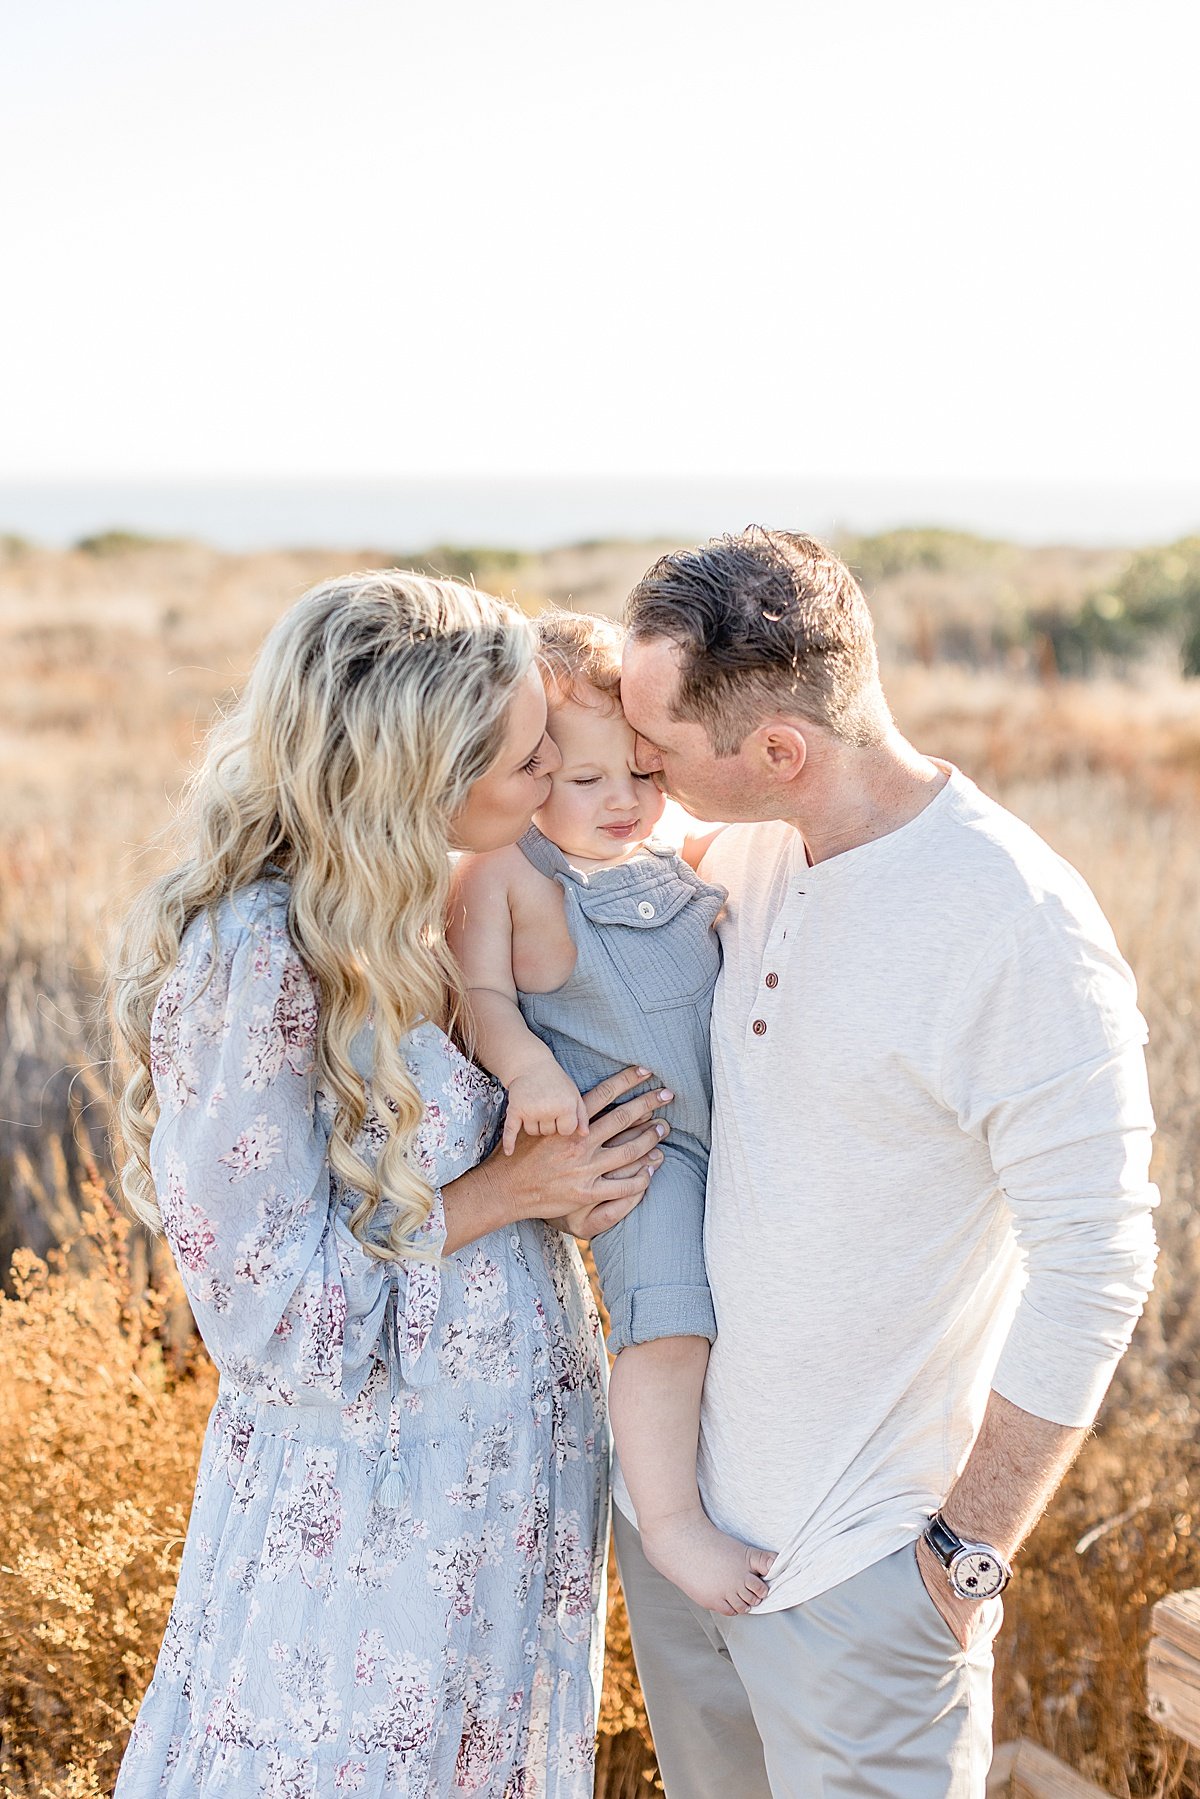 Outdoor family portrait, candid photography mom and dad kissing baby at beach with Ambre Williams Photography